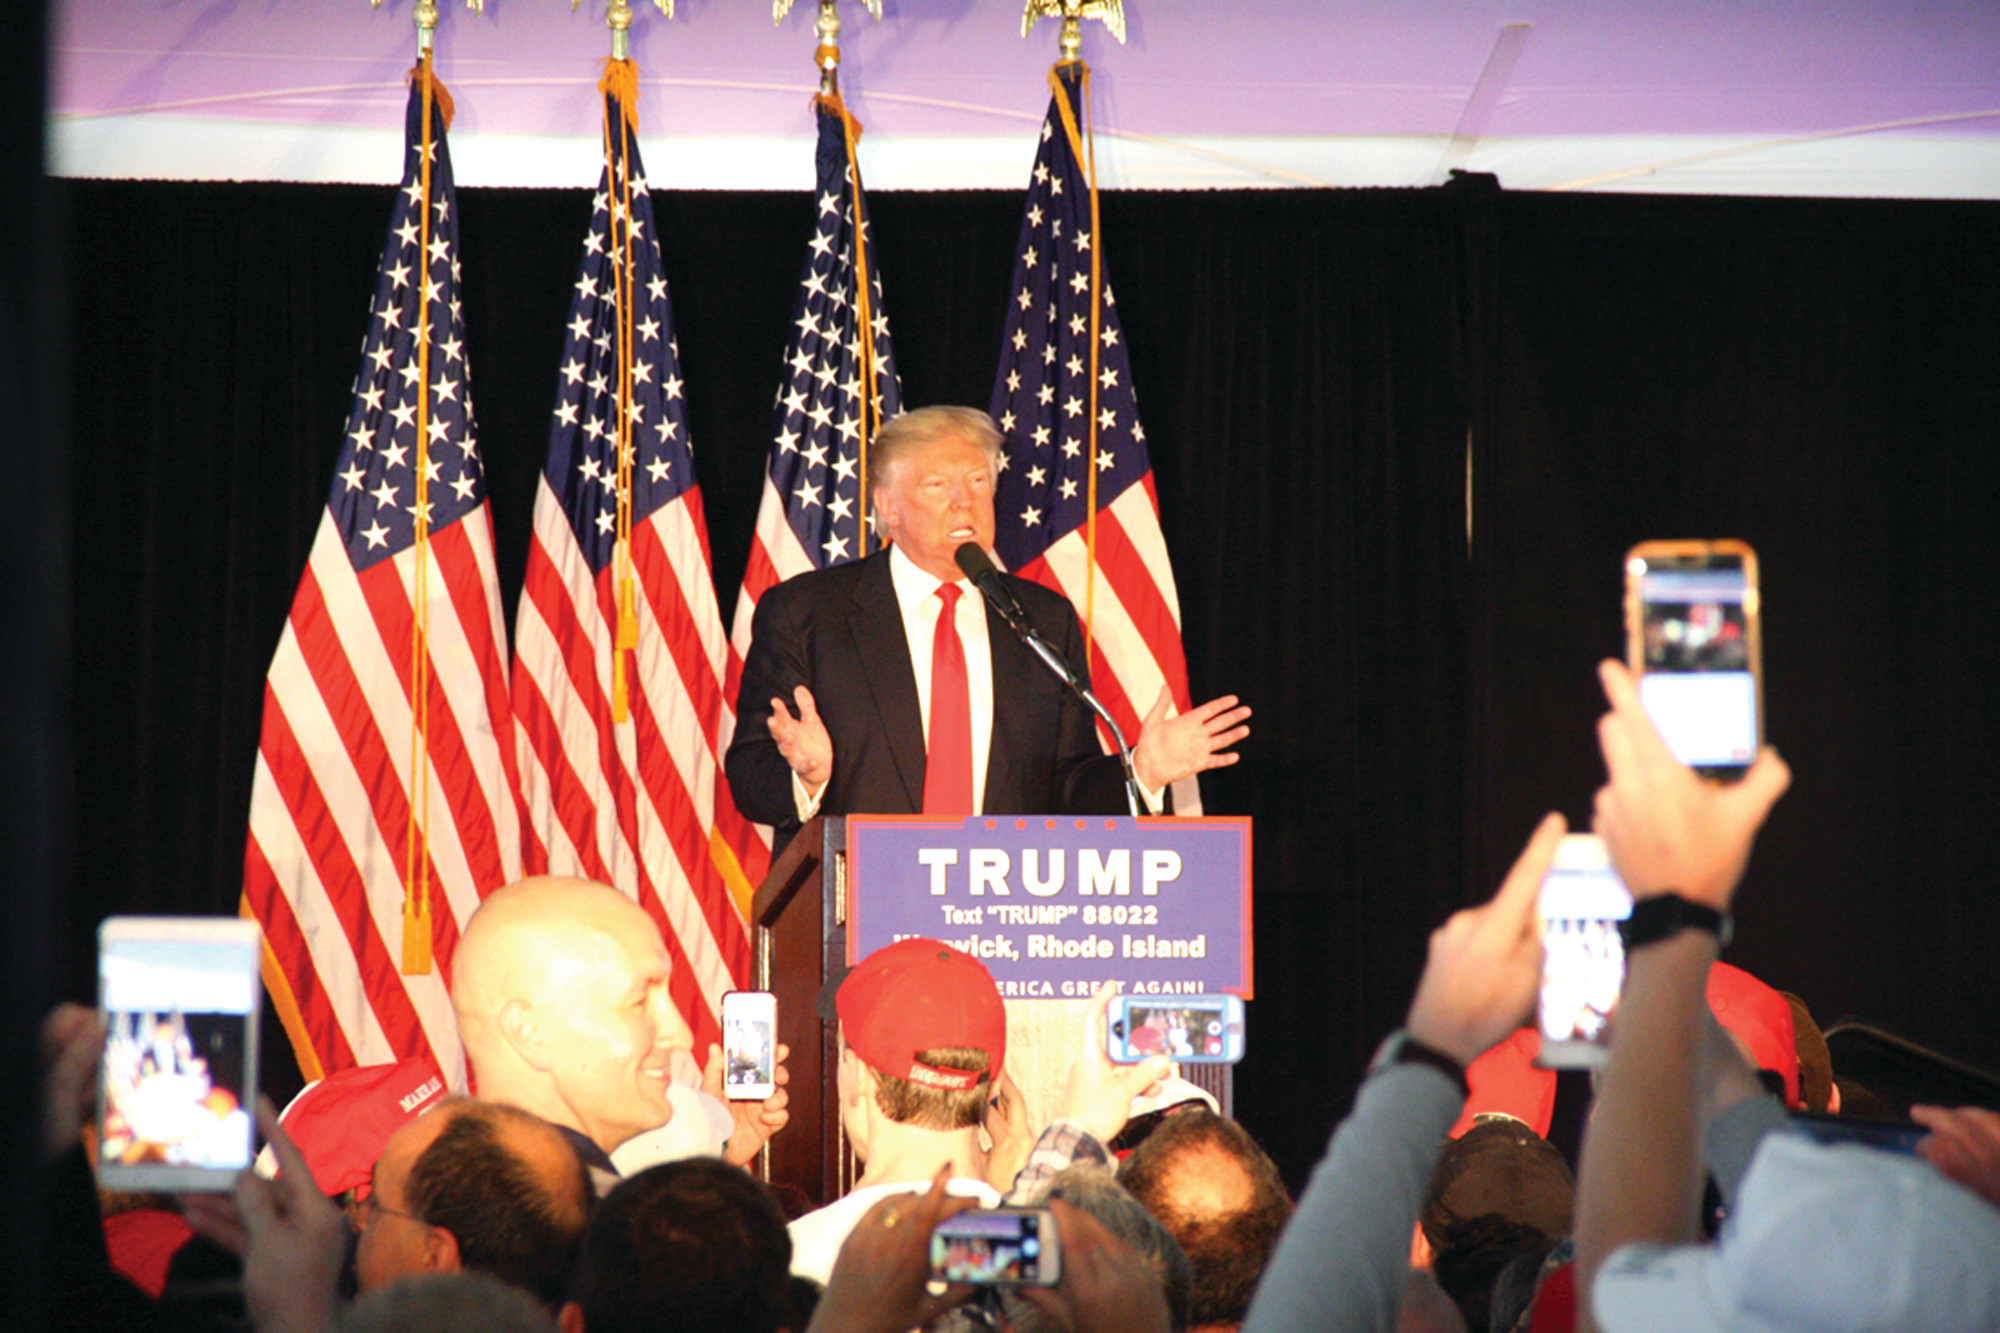 ‘BOSS’ APPEAL: In this file photo, Donald Trump speaks to supporters during an April 2016 campaign stop in Warwick. The authors of “Trump’s Democrats” believe Trump’s appeal in communities like Johnston may be tied to the tradition of machine politics, led by a “boss” at the top.